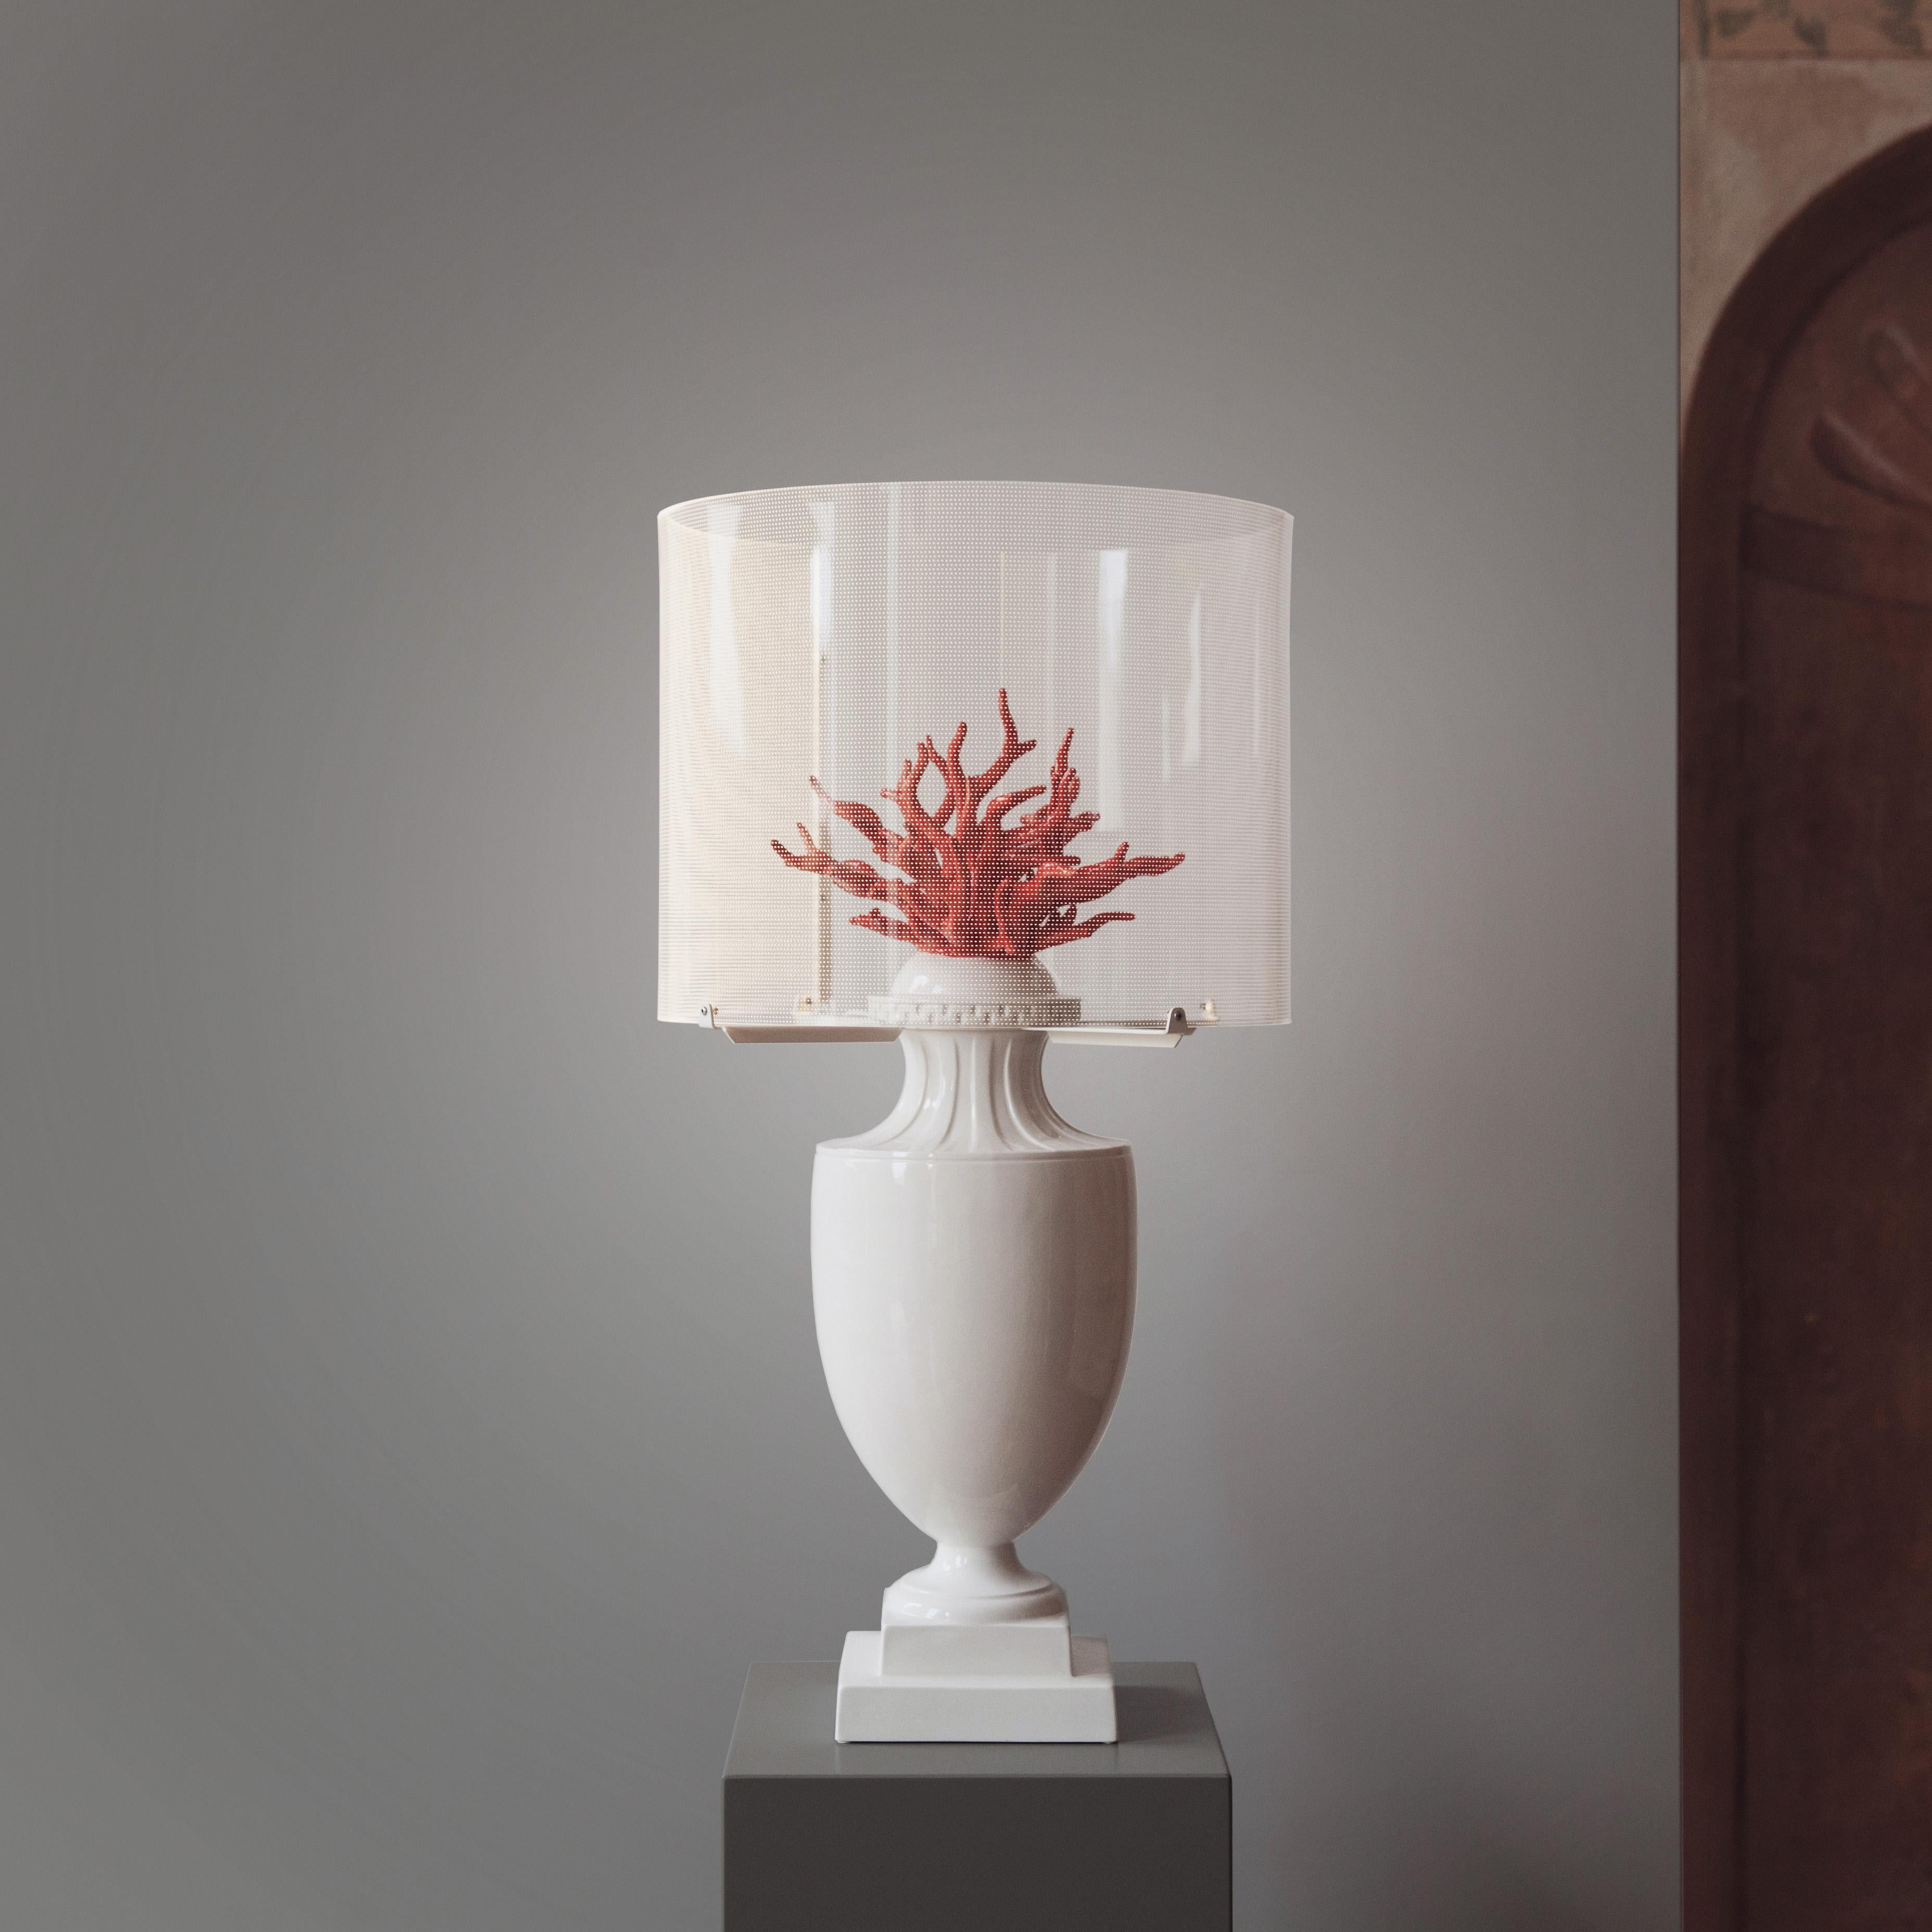 This sumptuous art décor table lamp belongs to the Coralli collection designed by Massimo Marcomini, entirely handmade in Italy from superior ceramic in the Venetian tradition. The Amphora-shaped pedestal offers an intriguing contrast to the